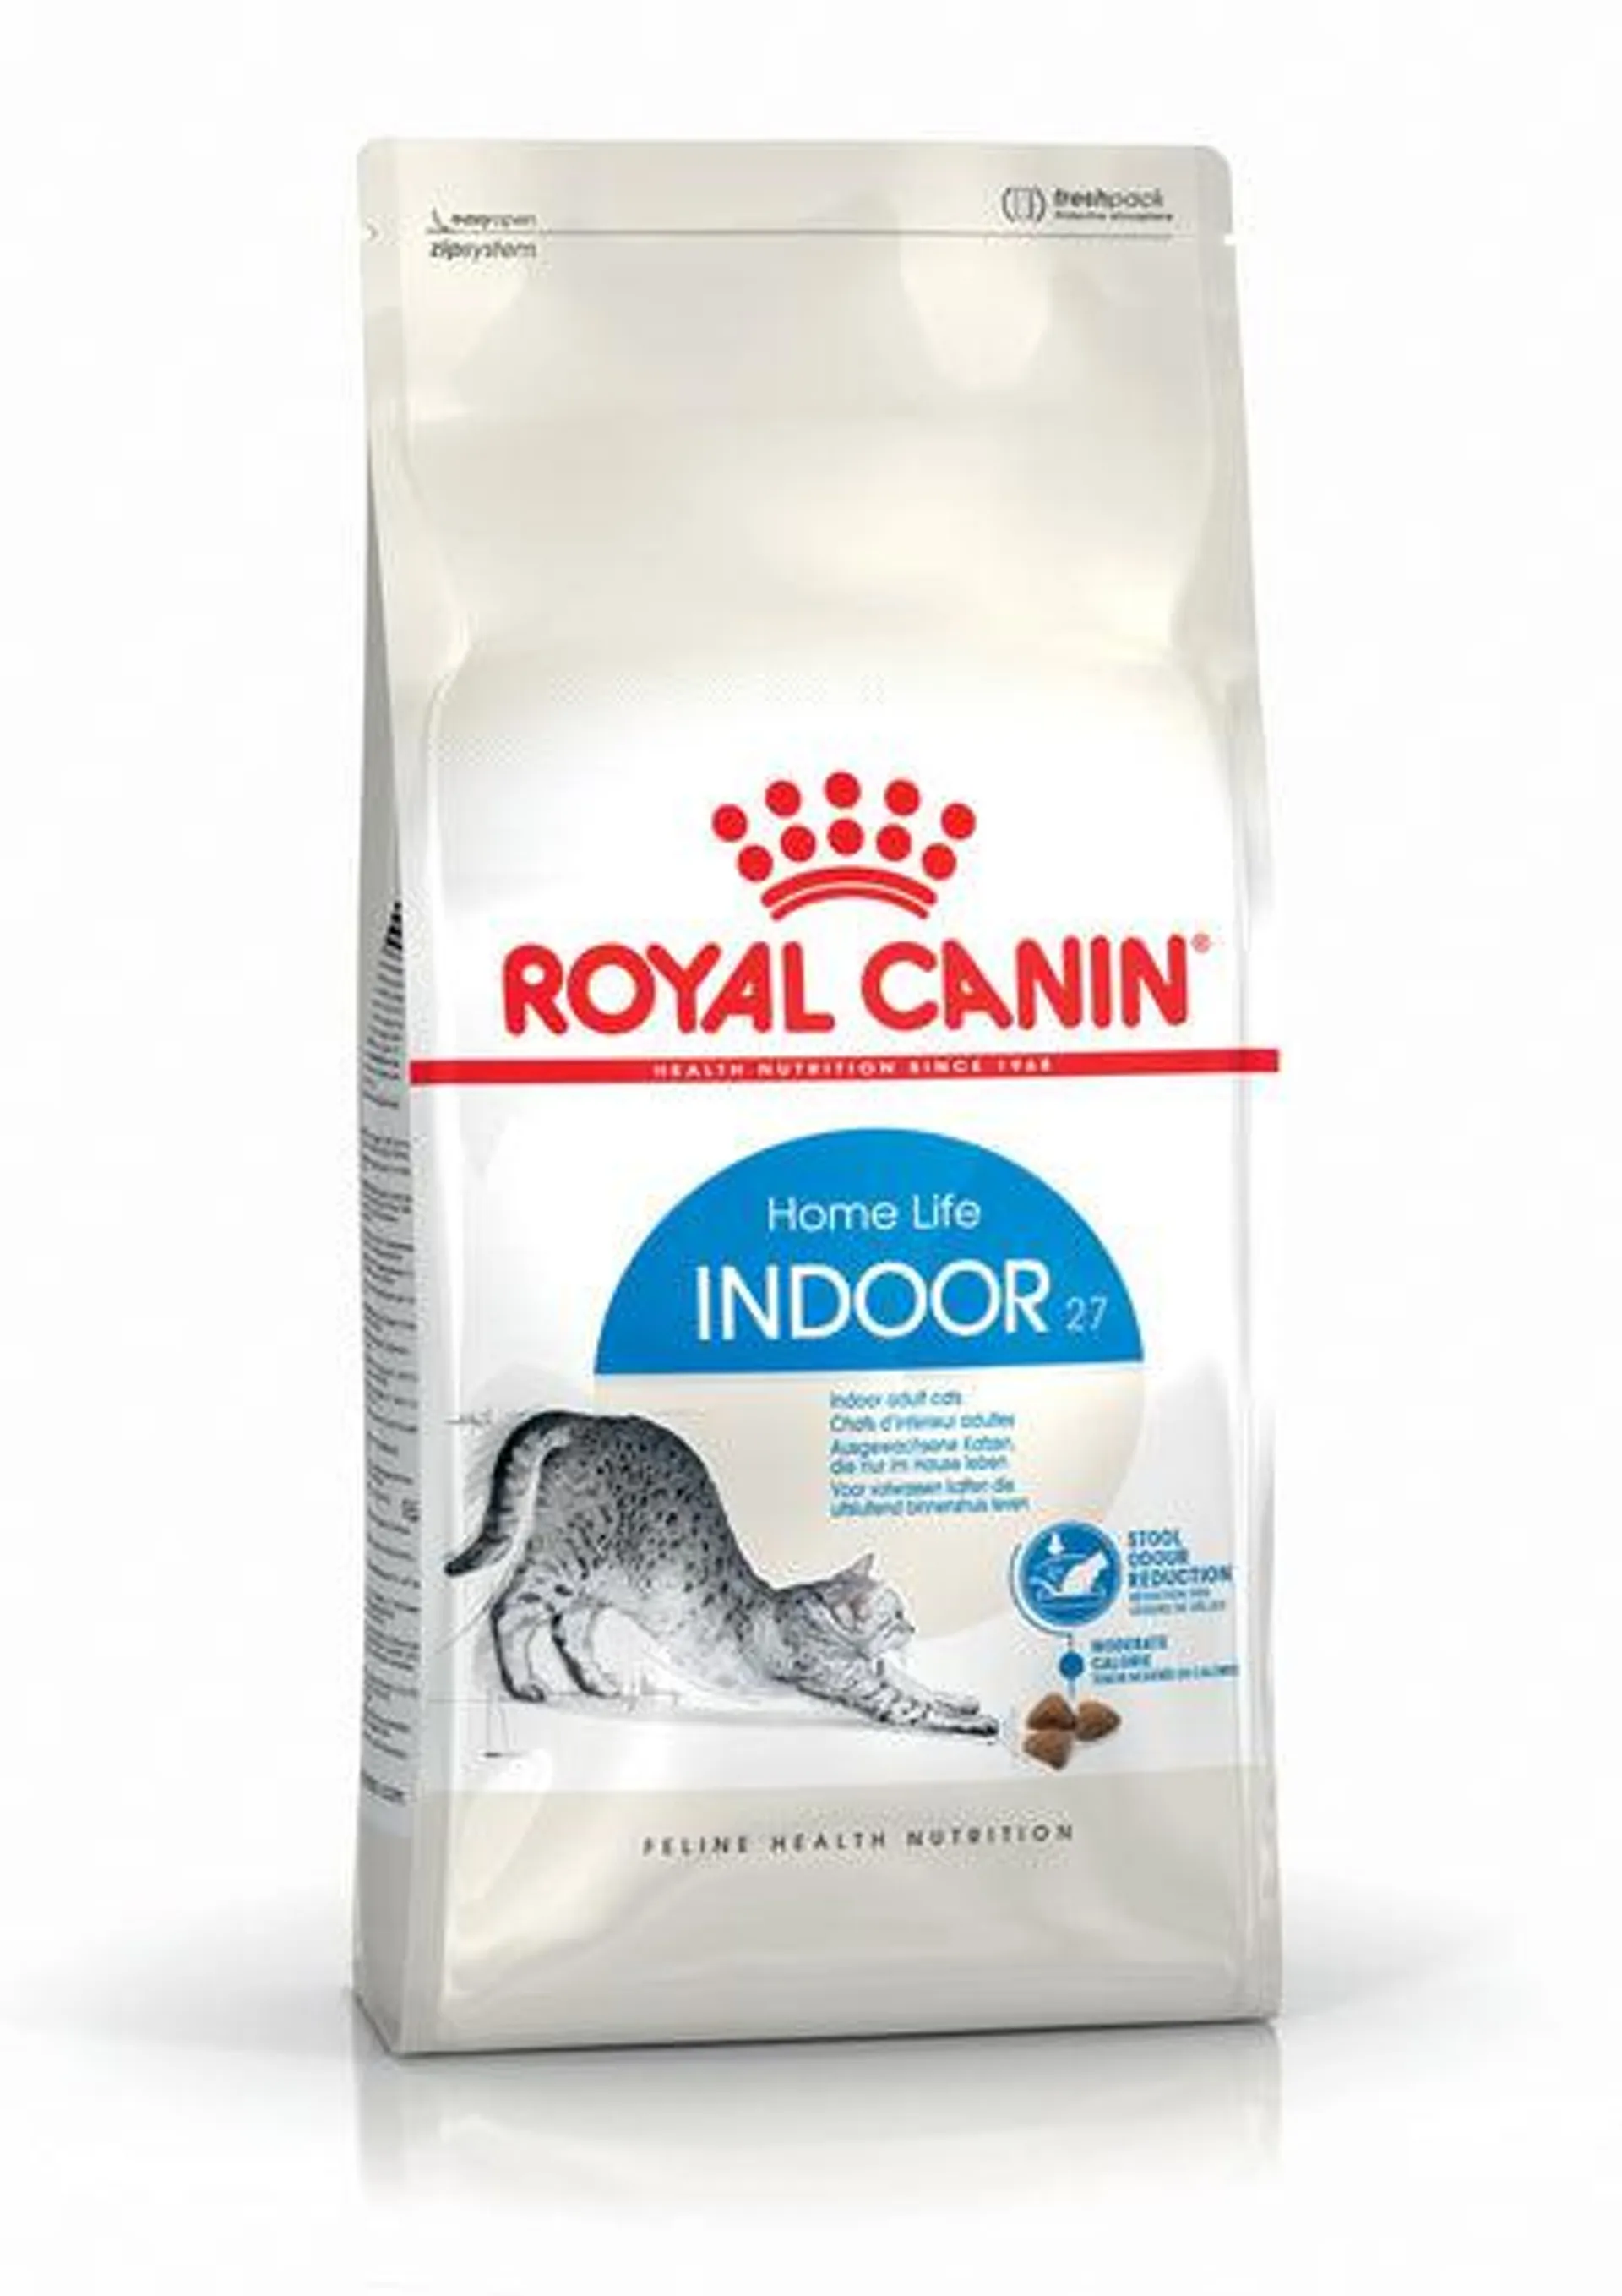 Royal Canin - Indoor Adult Cat Dry Food (10kg)